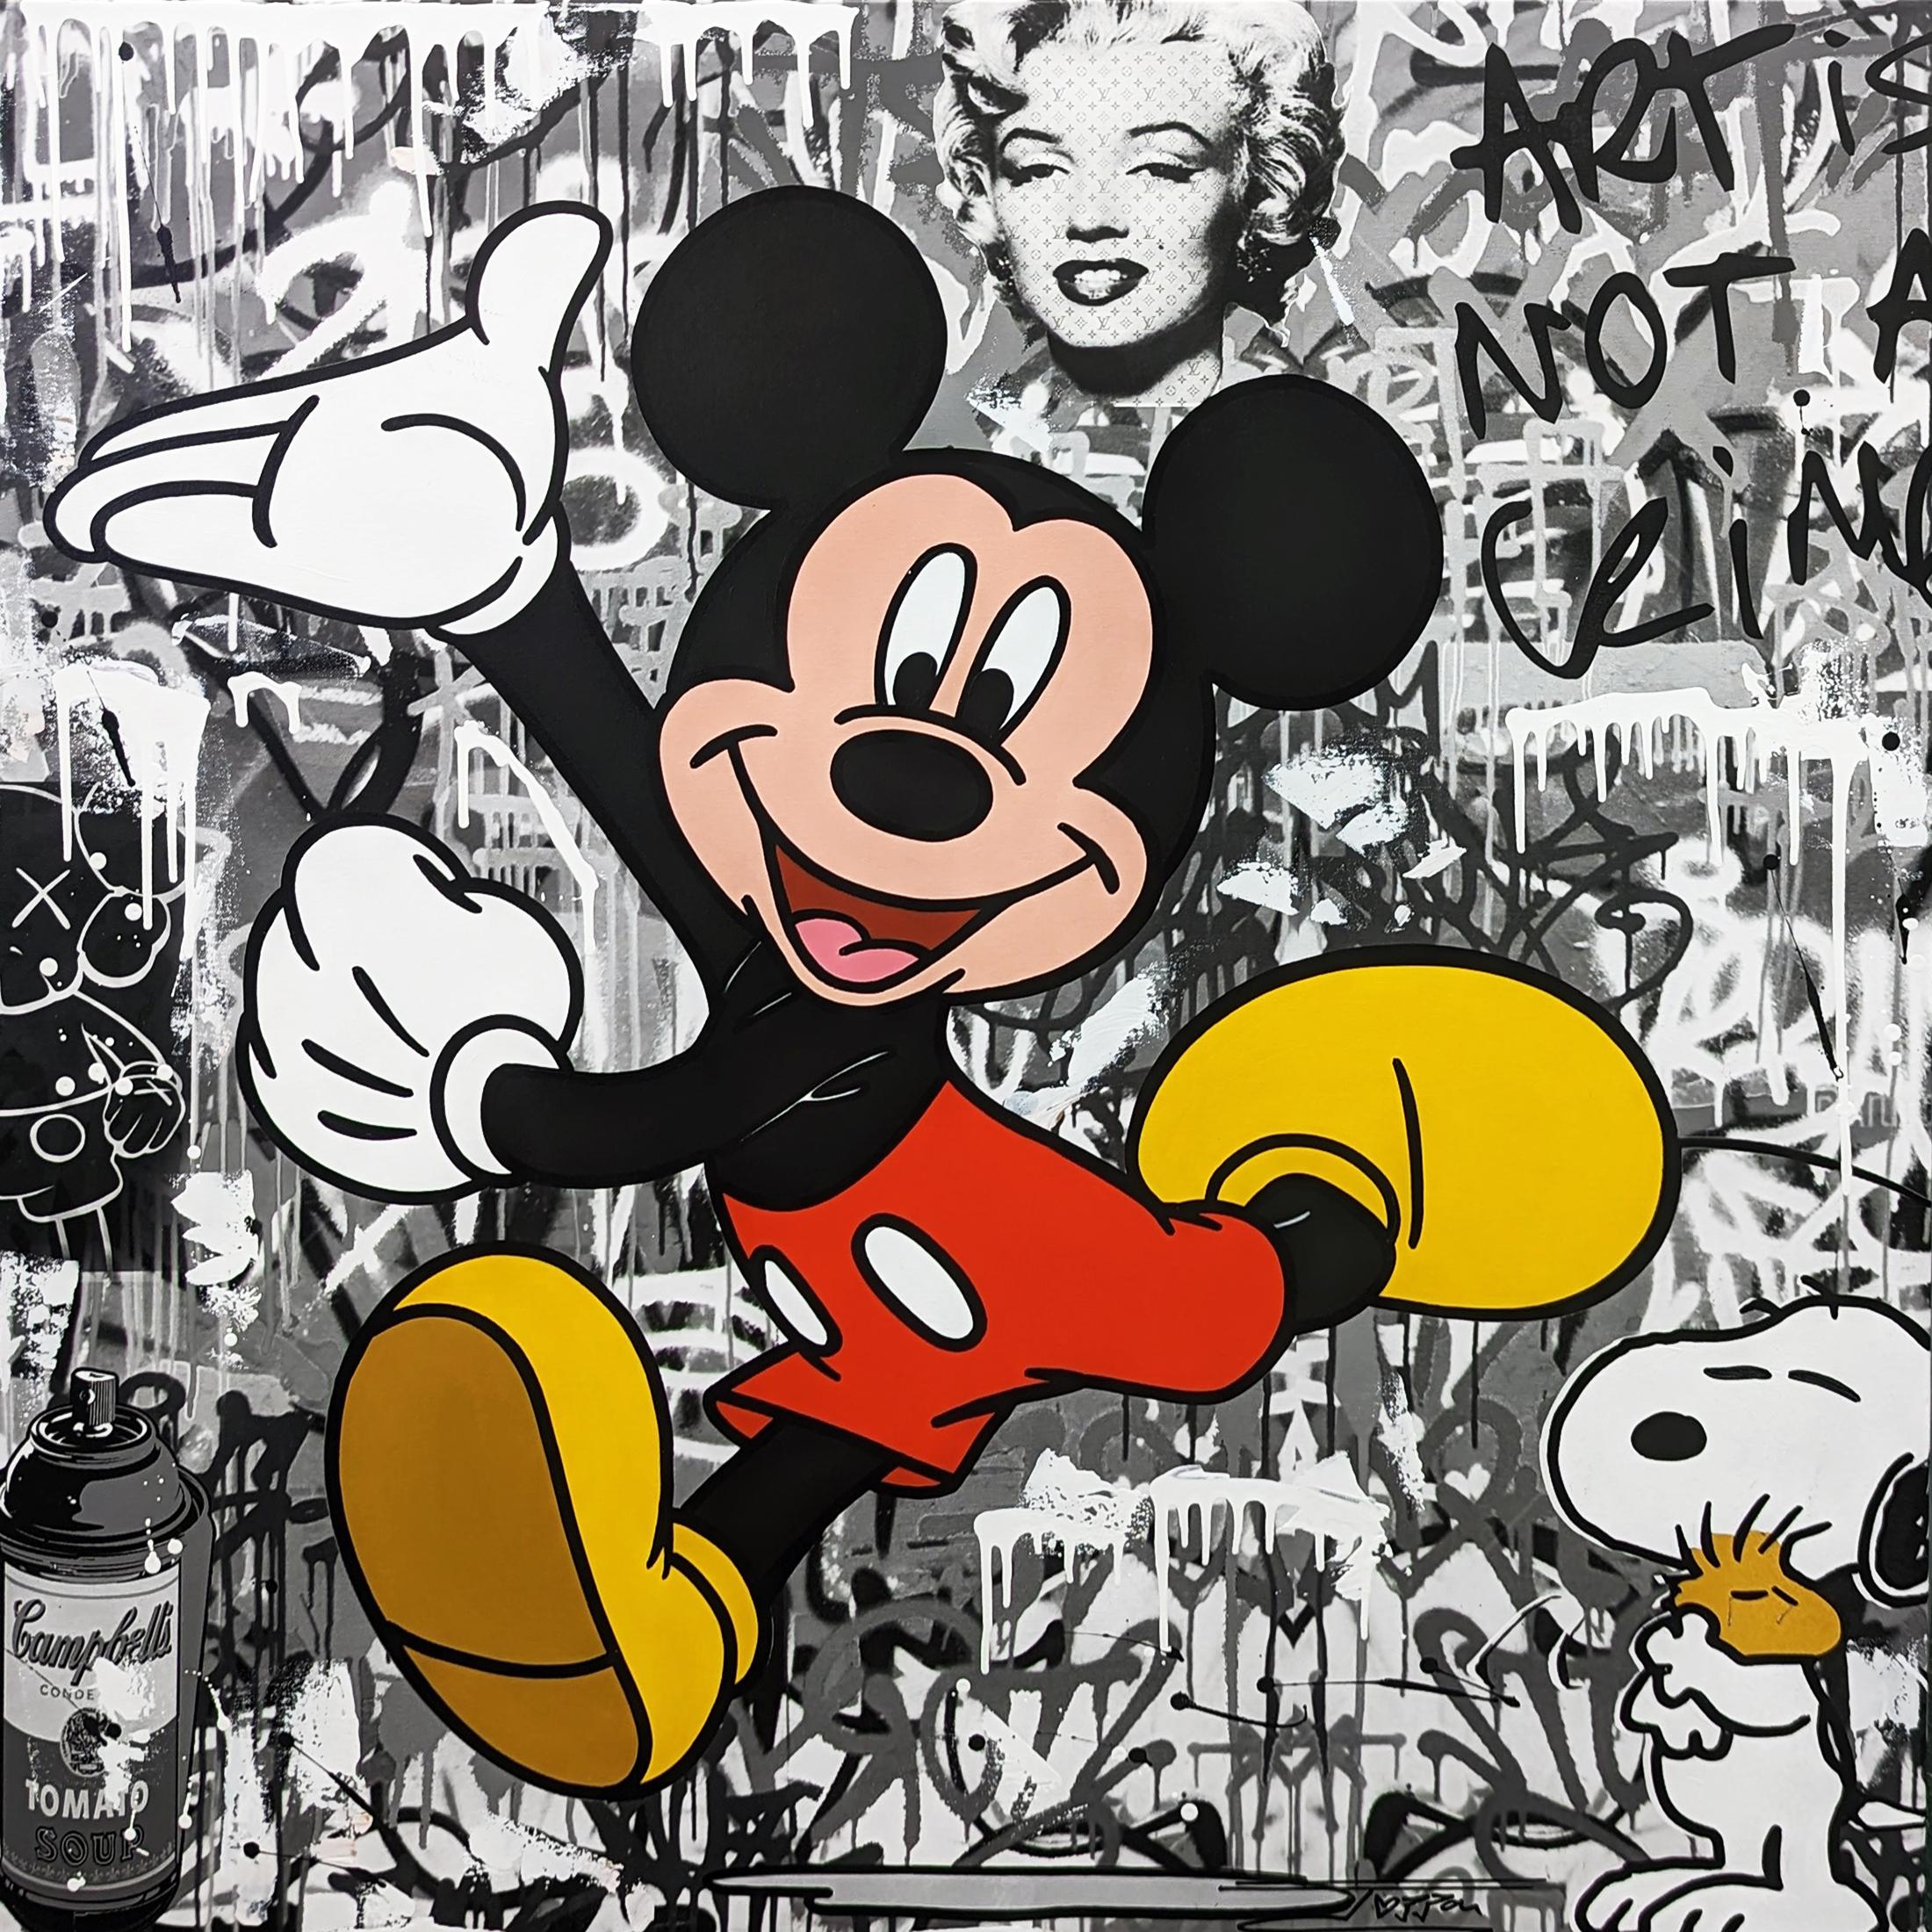 Jozza Figurative Painting - NOT A CRIME! (MICKEY MOUSE)